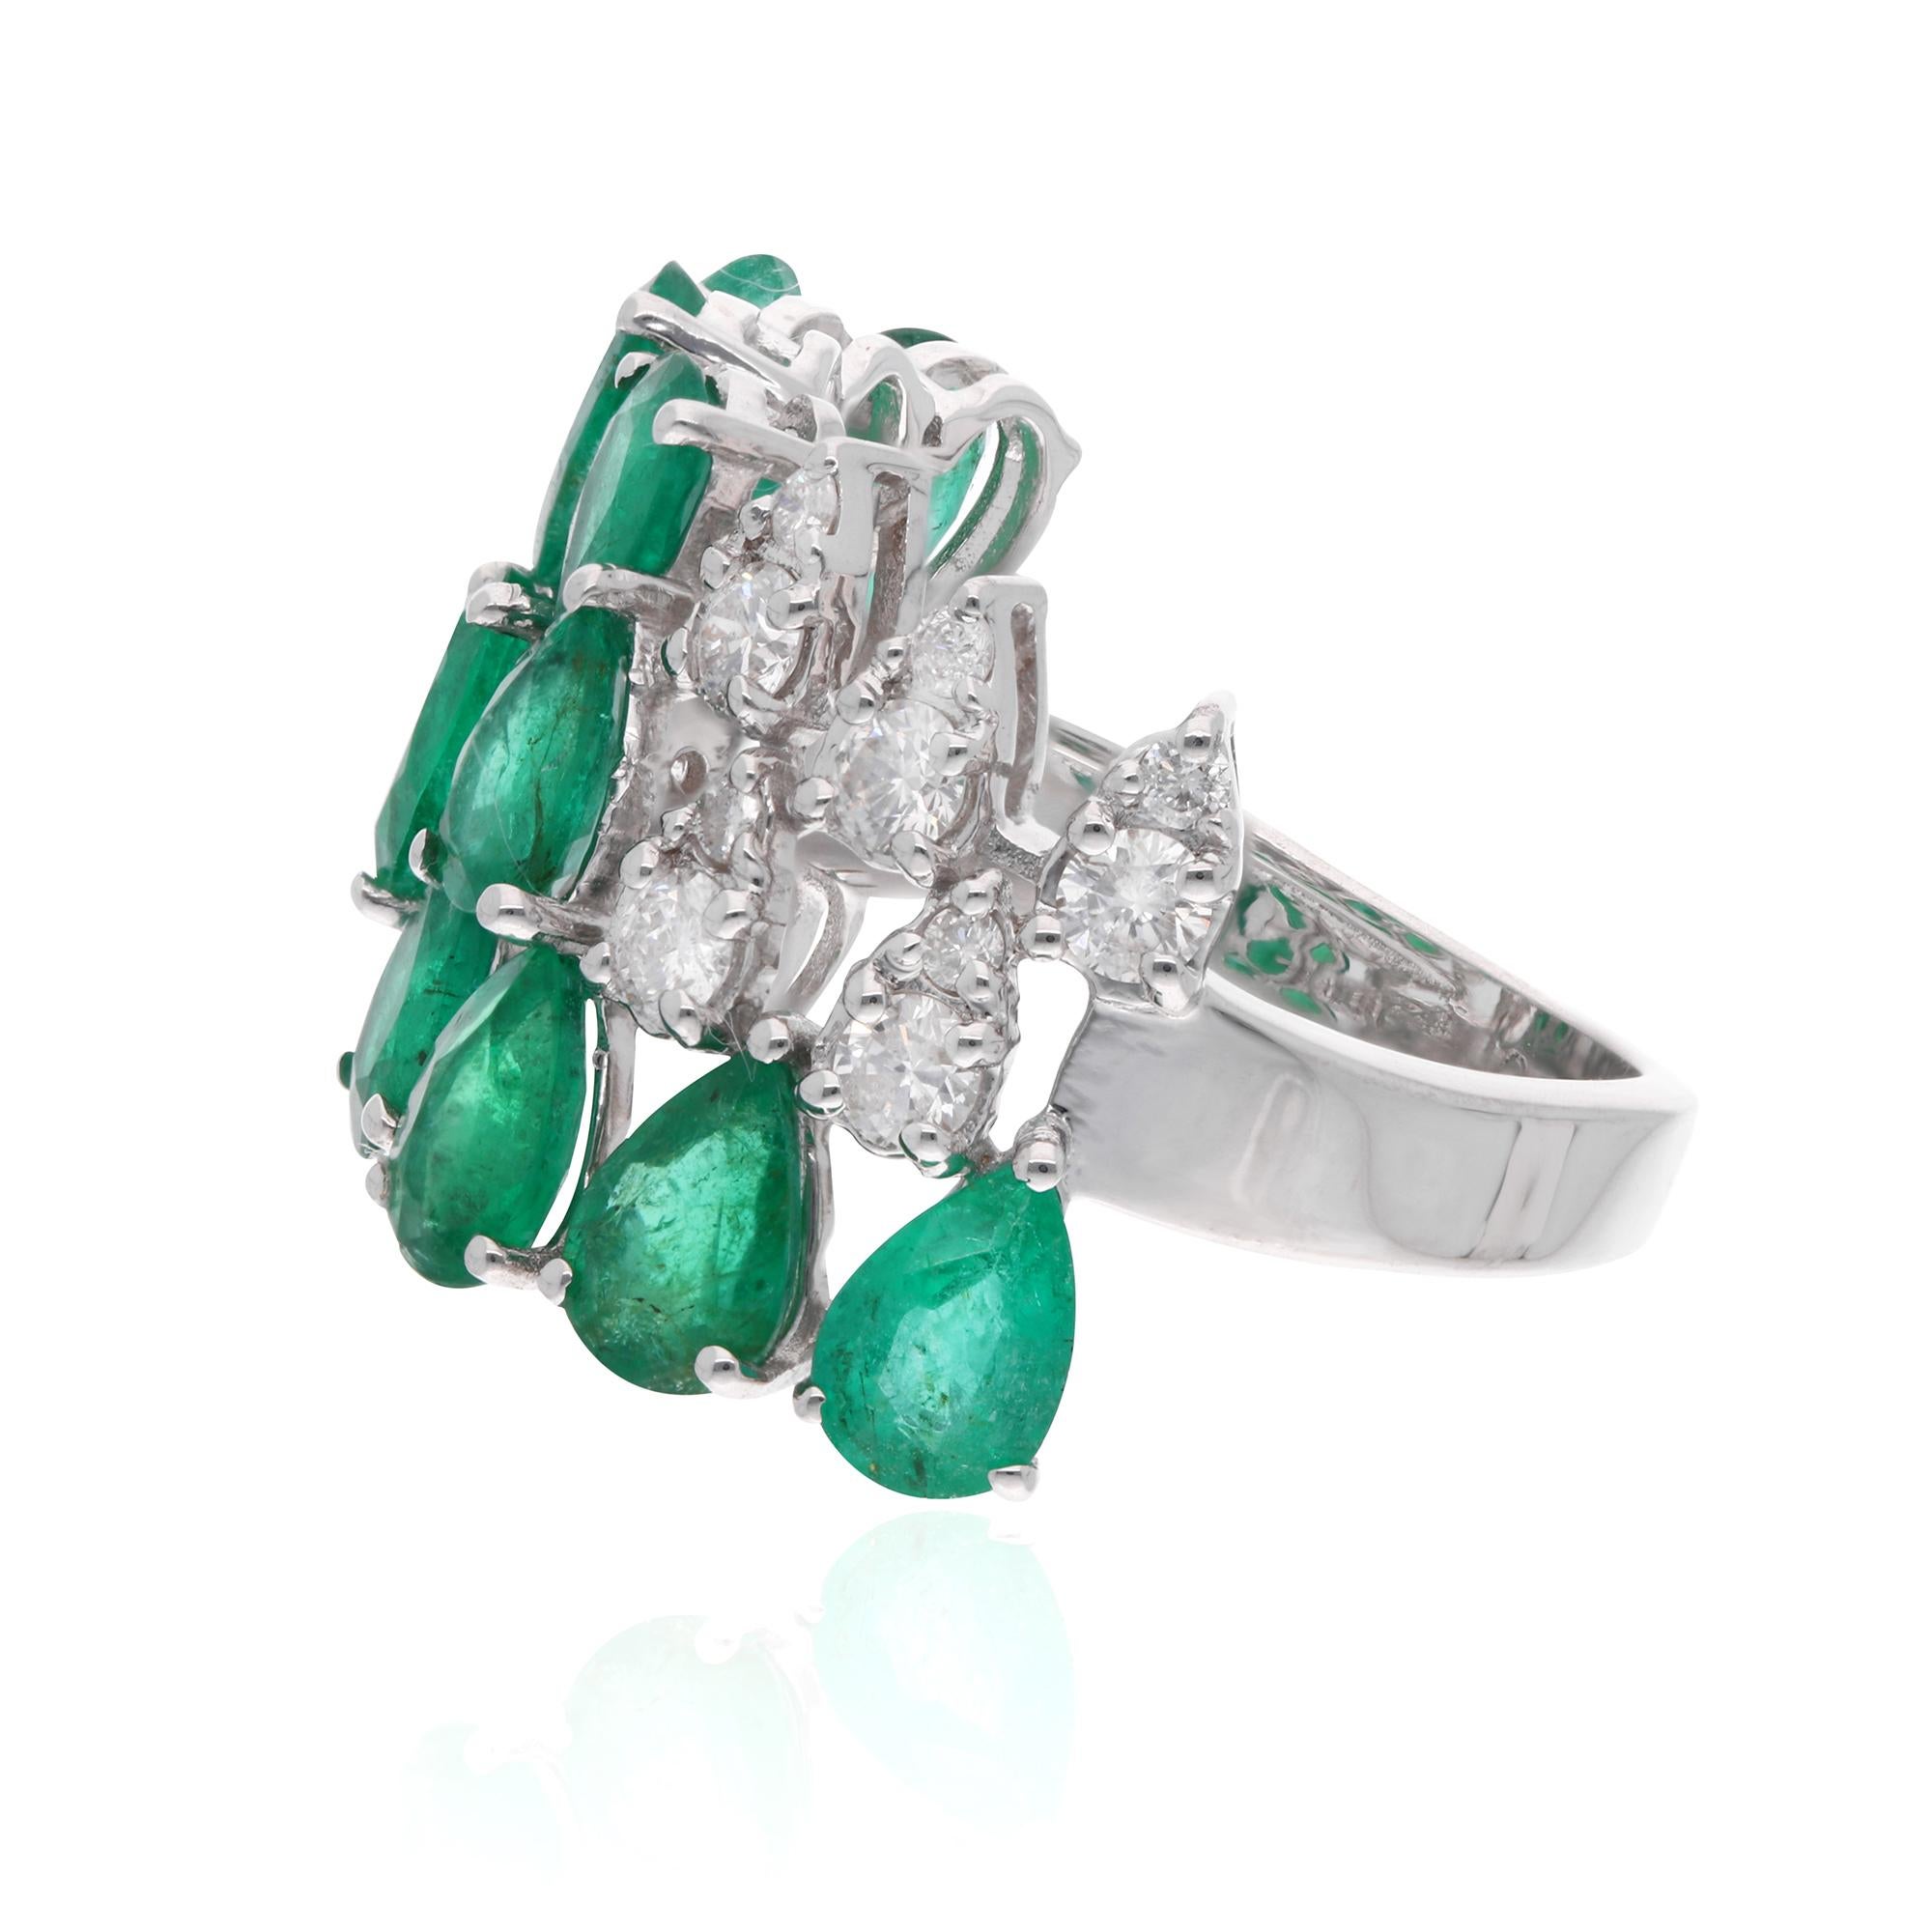 At the heart of this enchanting ring lies a magnificent Zambian Emerald gemstone, renowned for its rich green hue and unparalleled beauty. Sourced from the depths of Zambia's emerald mines, each stone is meticulously selected for its exceptional